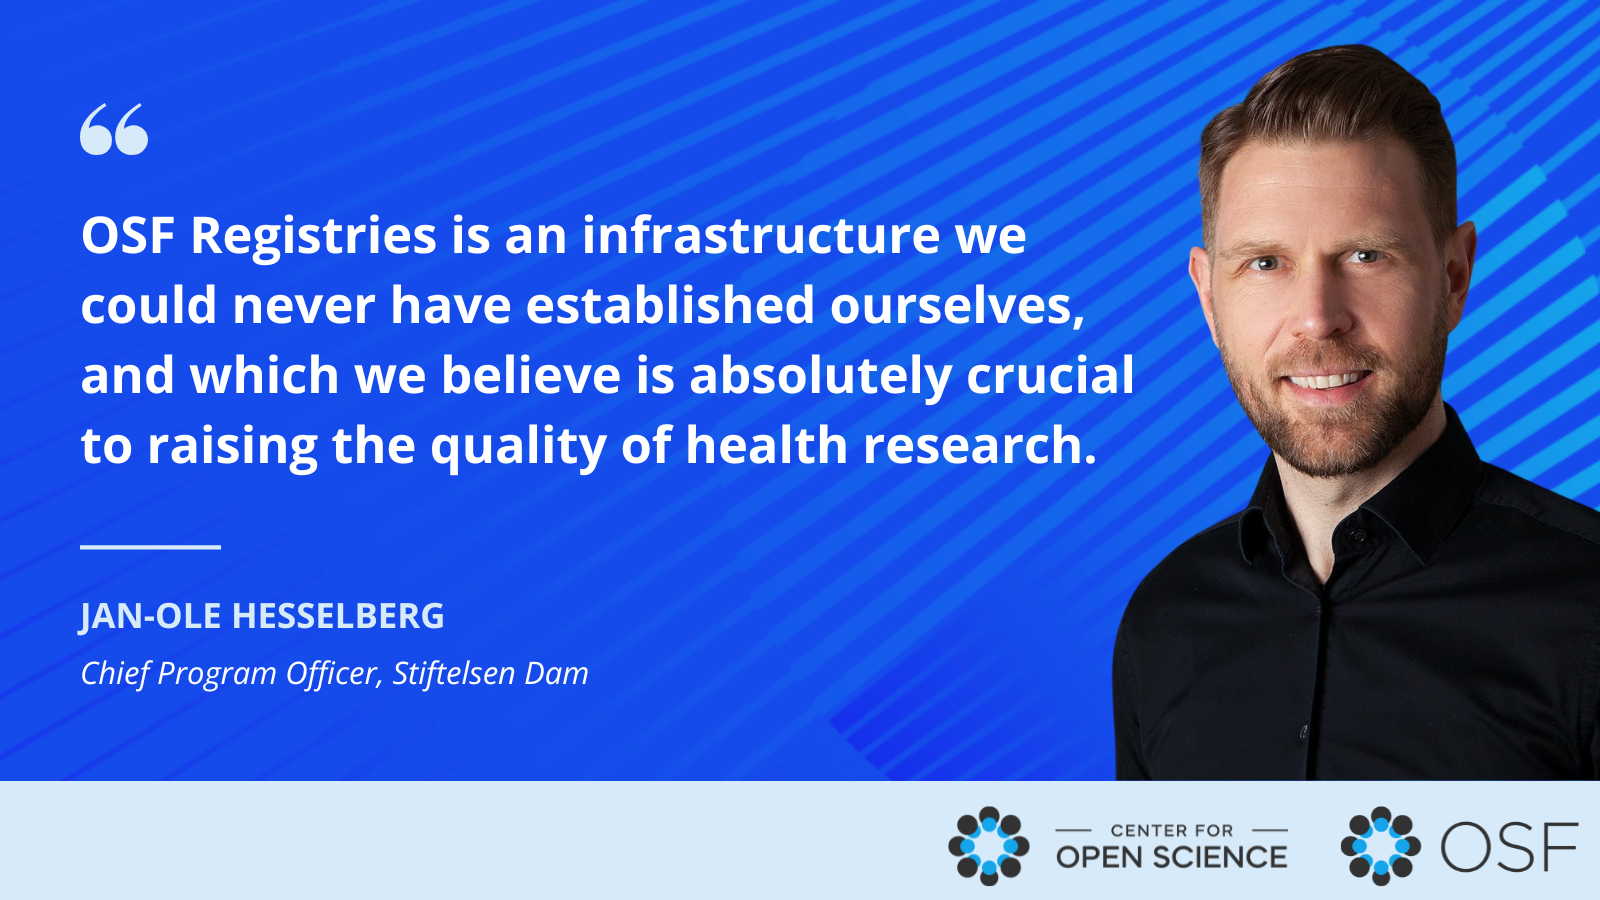 Image of quote: "[OSF Registries] is an infrastructure we could never have established ourselves, and which we believe is absolutely crucial to raising the quality of health research."